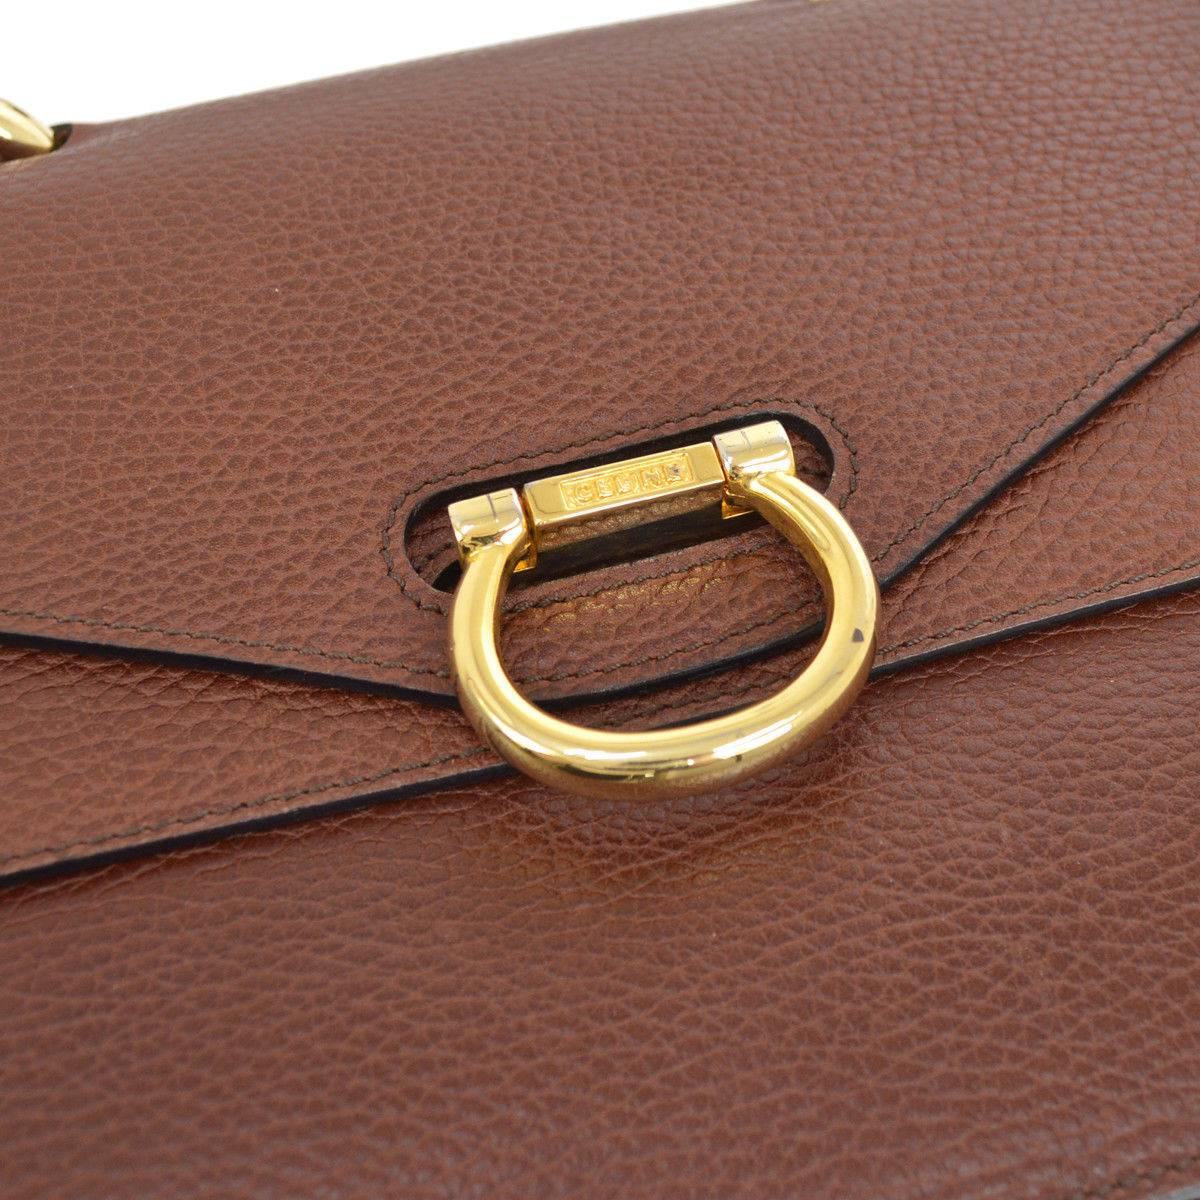 Celine Cognac Leather Gold Kelly Style Evening Top Handle Satchel Flap Bag

Leather
Gold tone hardware
Leather lining 
Made in Italy
Handle drop 5.5